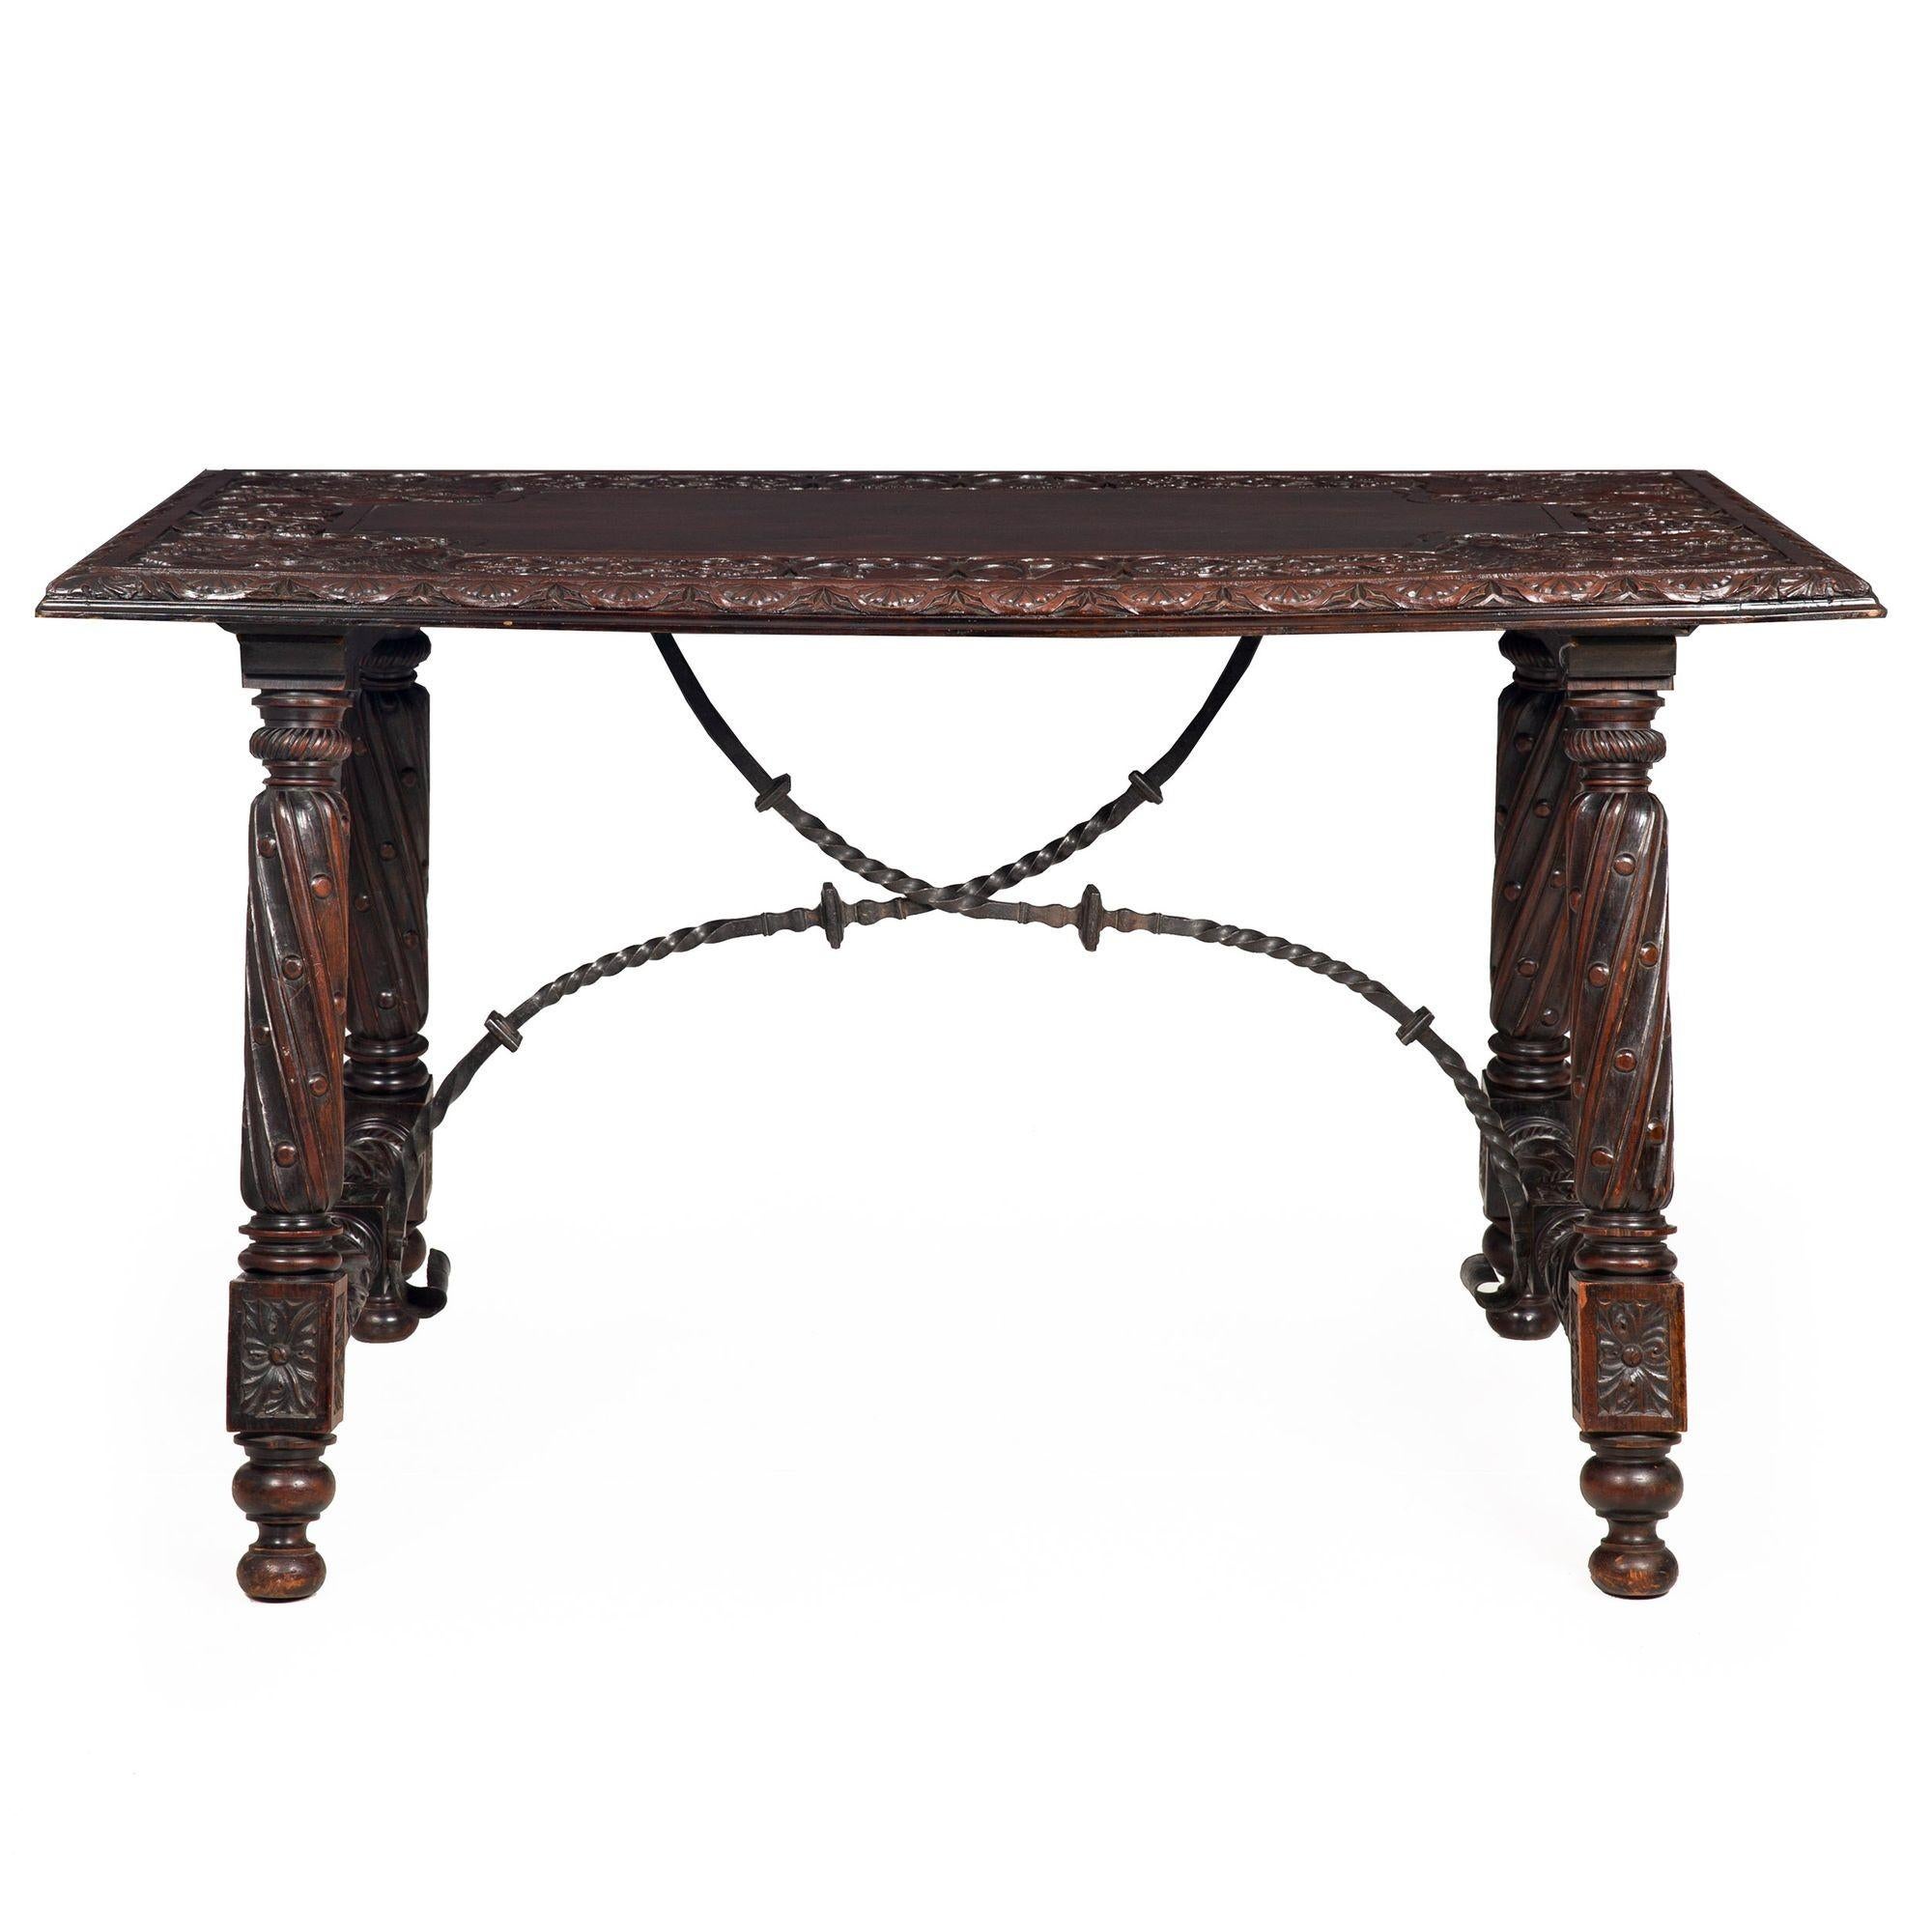 GOTHIC REVIVAL CARVED WALNUT LIBRARY TABLE WITH HERALDIC MOTIF
Europe, circa 1900
Item # 309AKJ22Q

A rich and beautifully made library table, the entire form is designed around the older Gothic table top. This is a richly patinated surface crafted